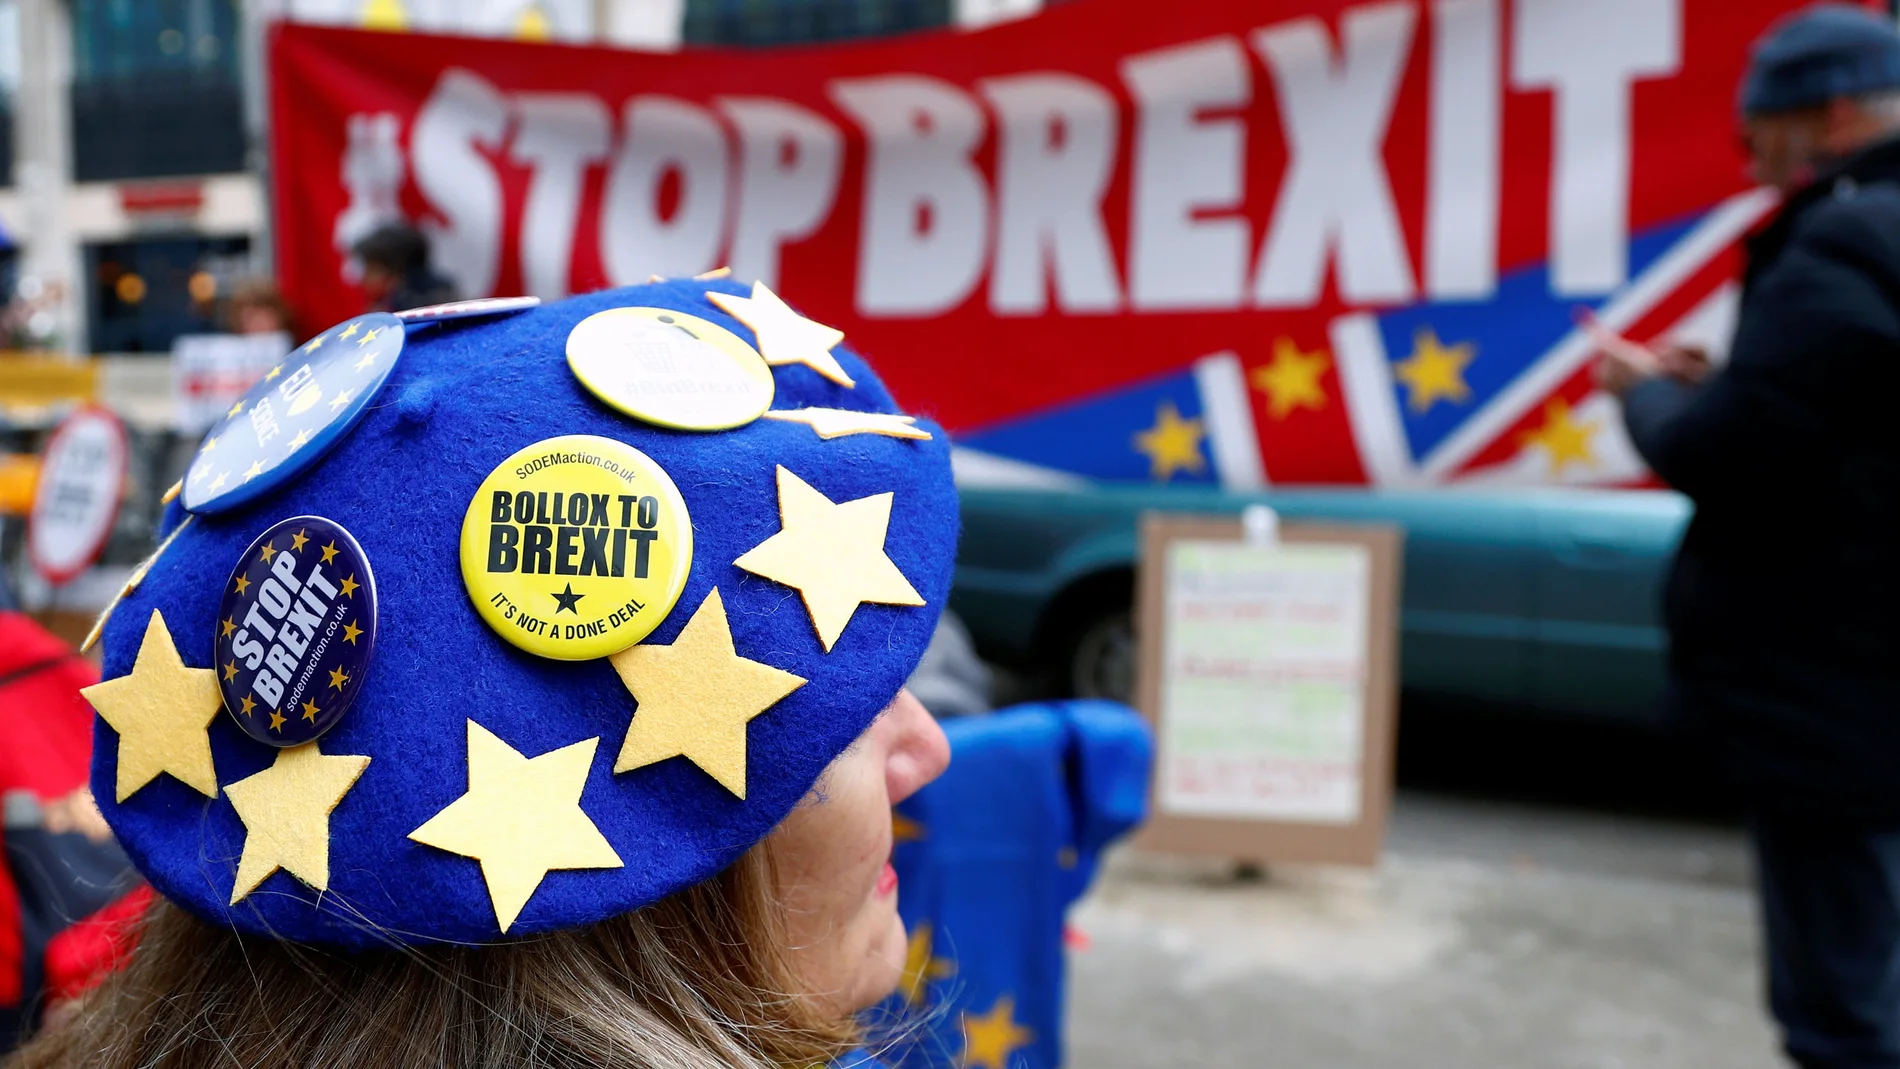 Anti-Brexit badges on a protester's beret are pictured during a demonstration in front of the British embassy in Brussels